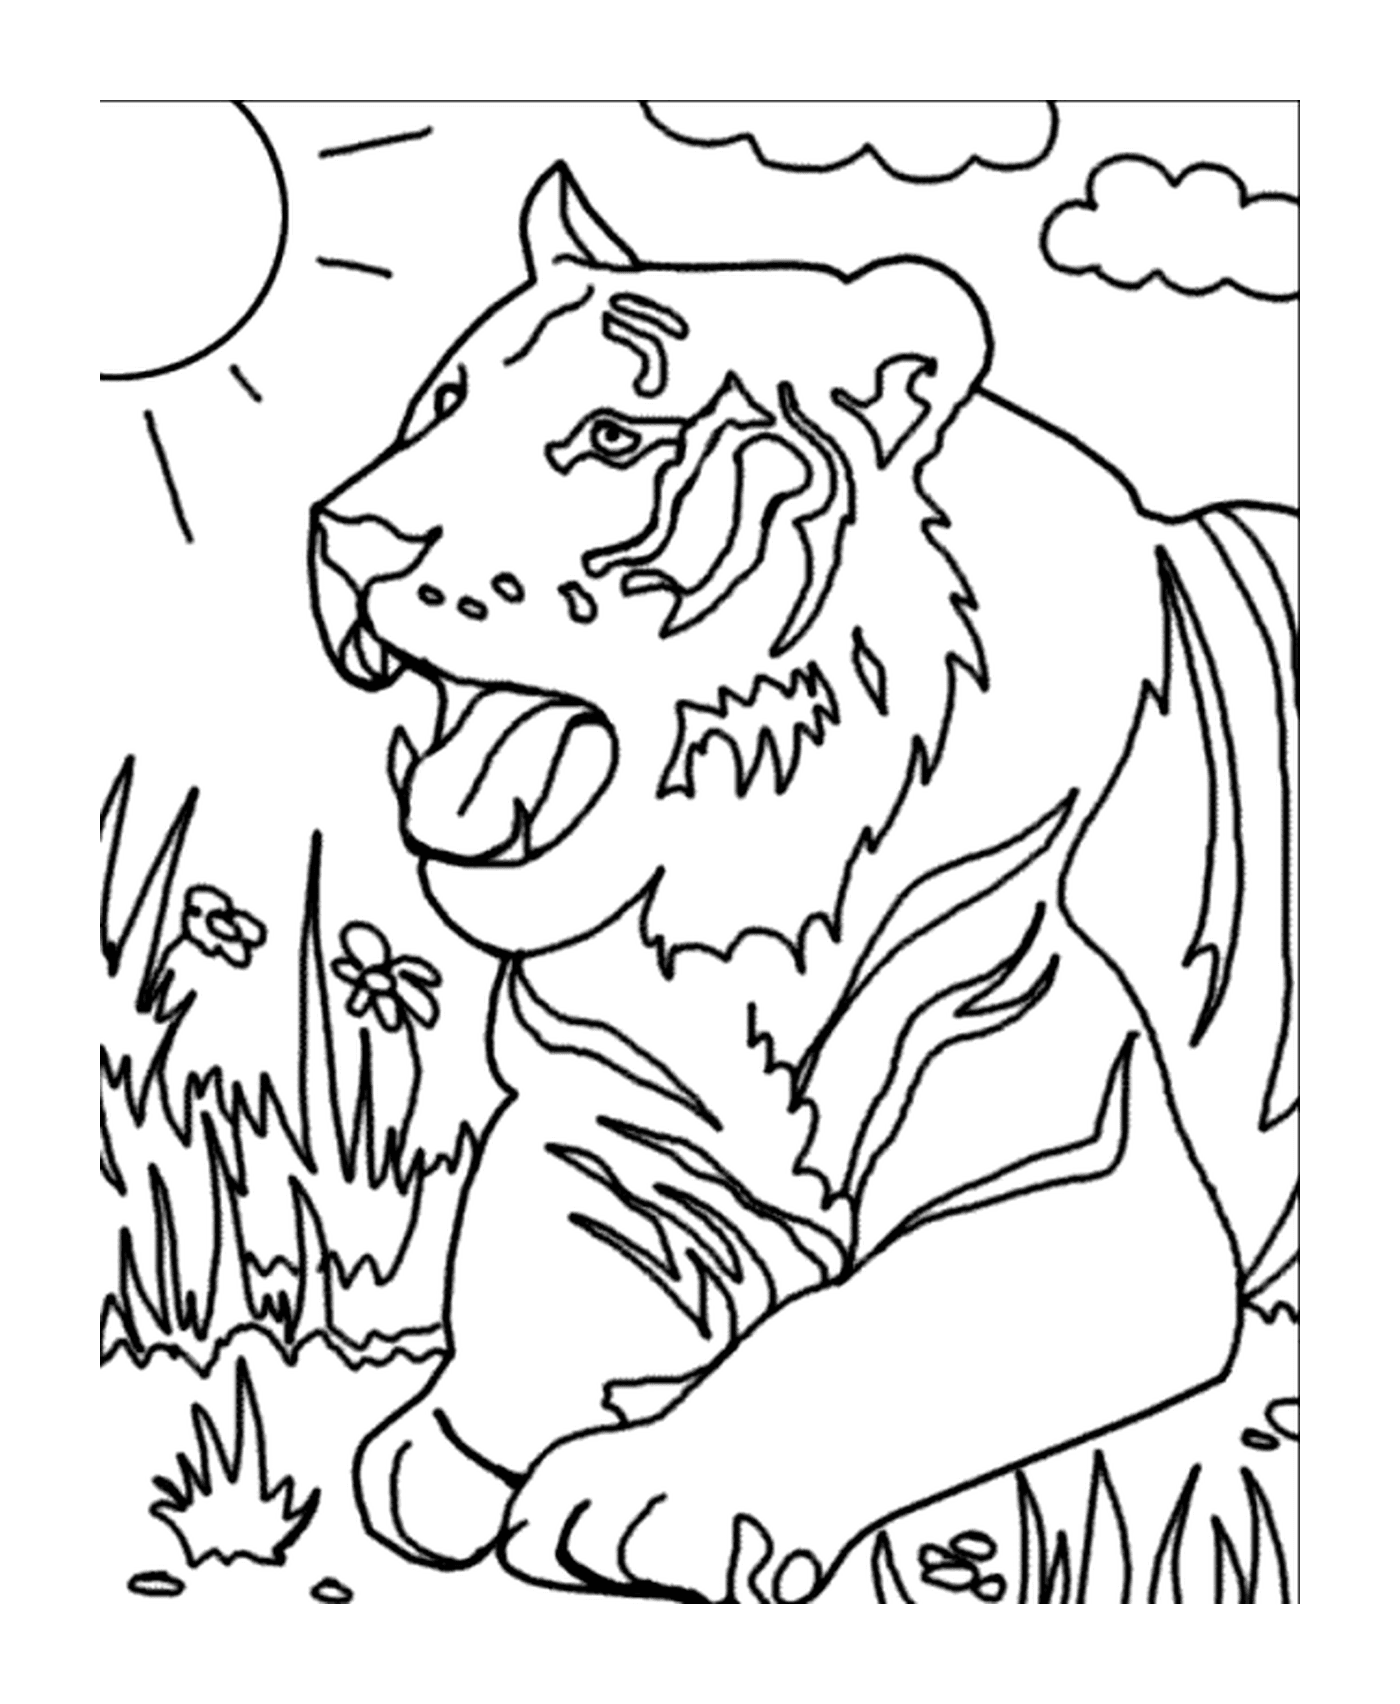  A tiger in the grass 